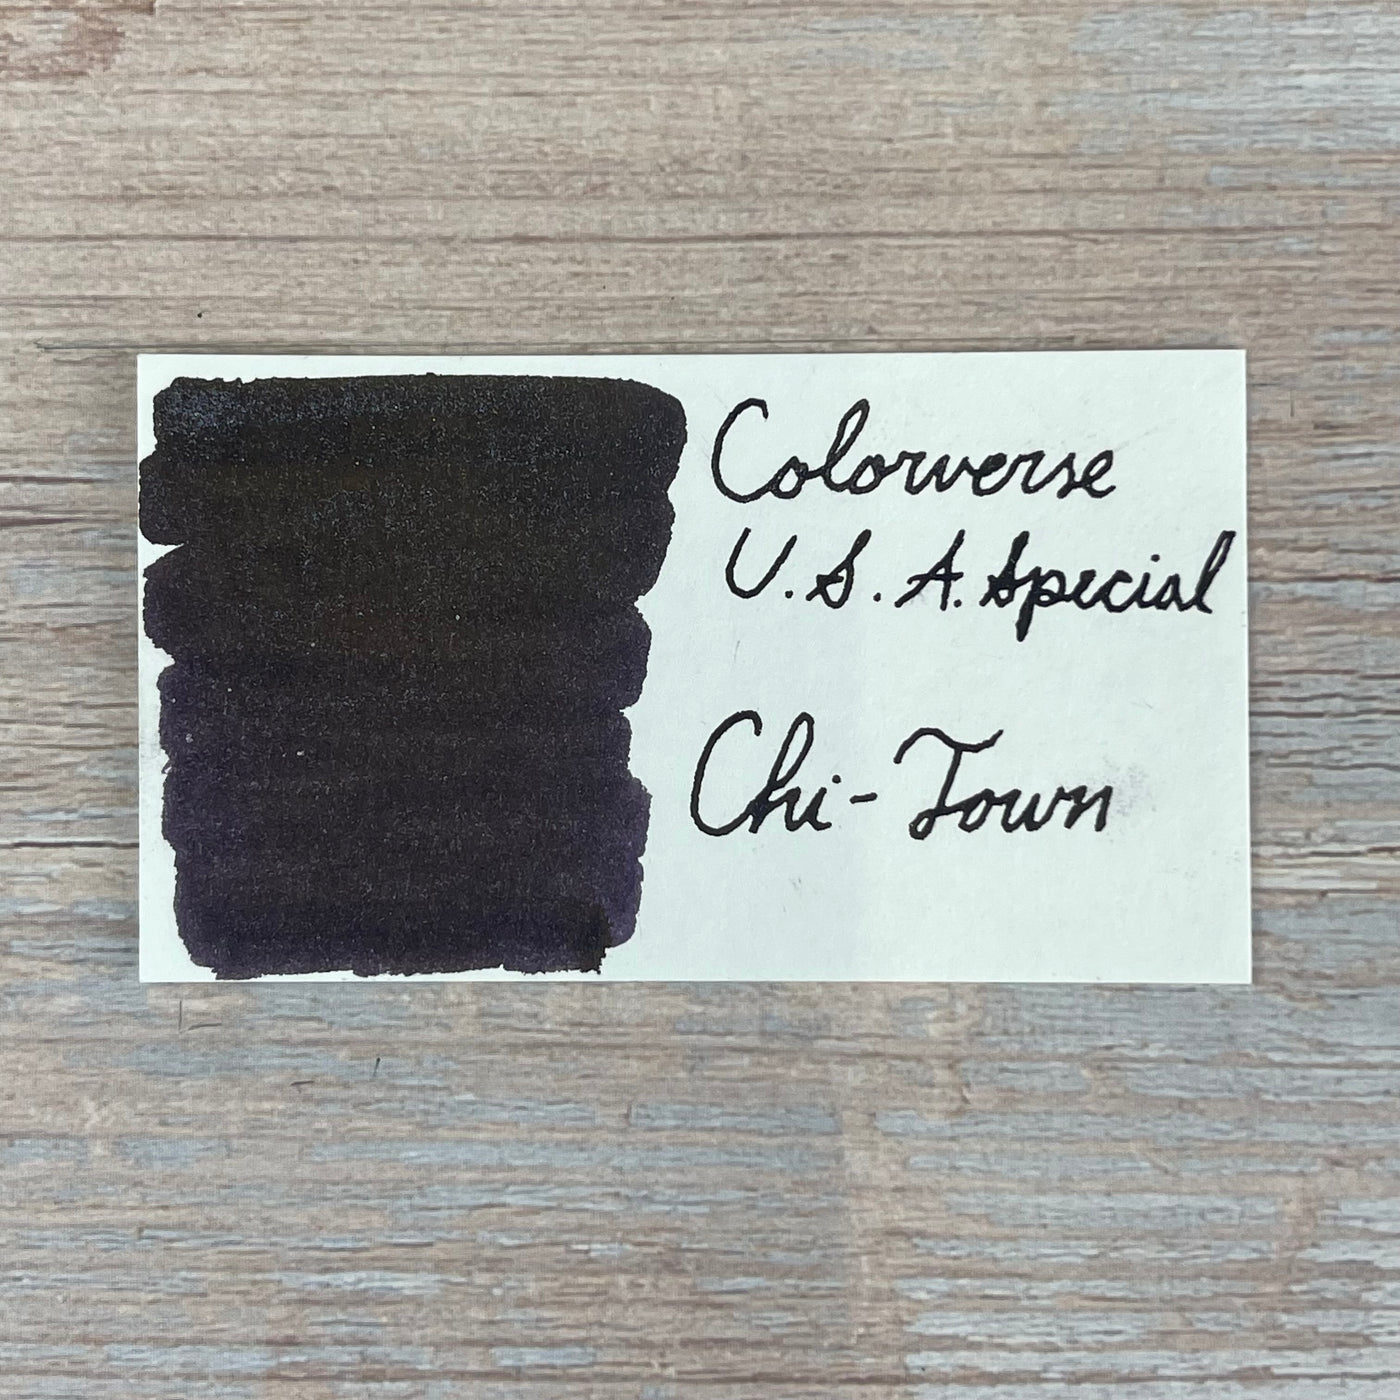 Colorverse USA Special Ink Bottle - California (from Cali) - 15 ml